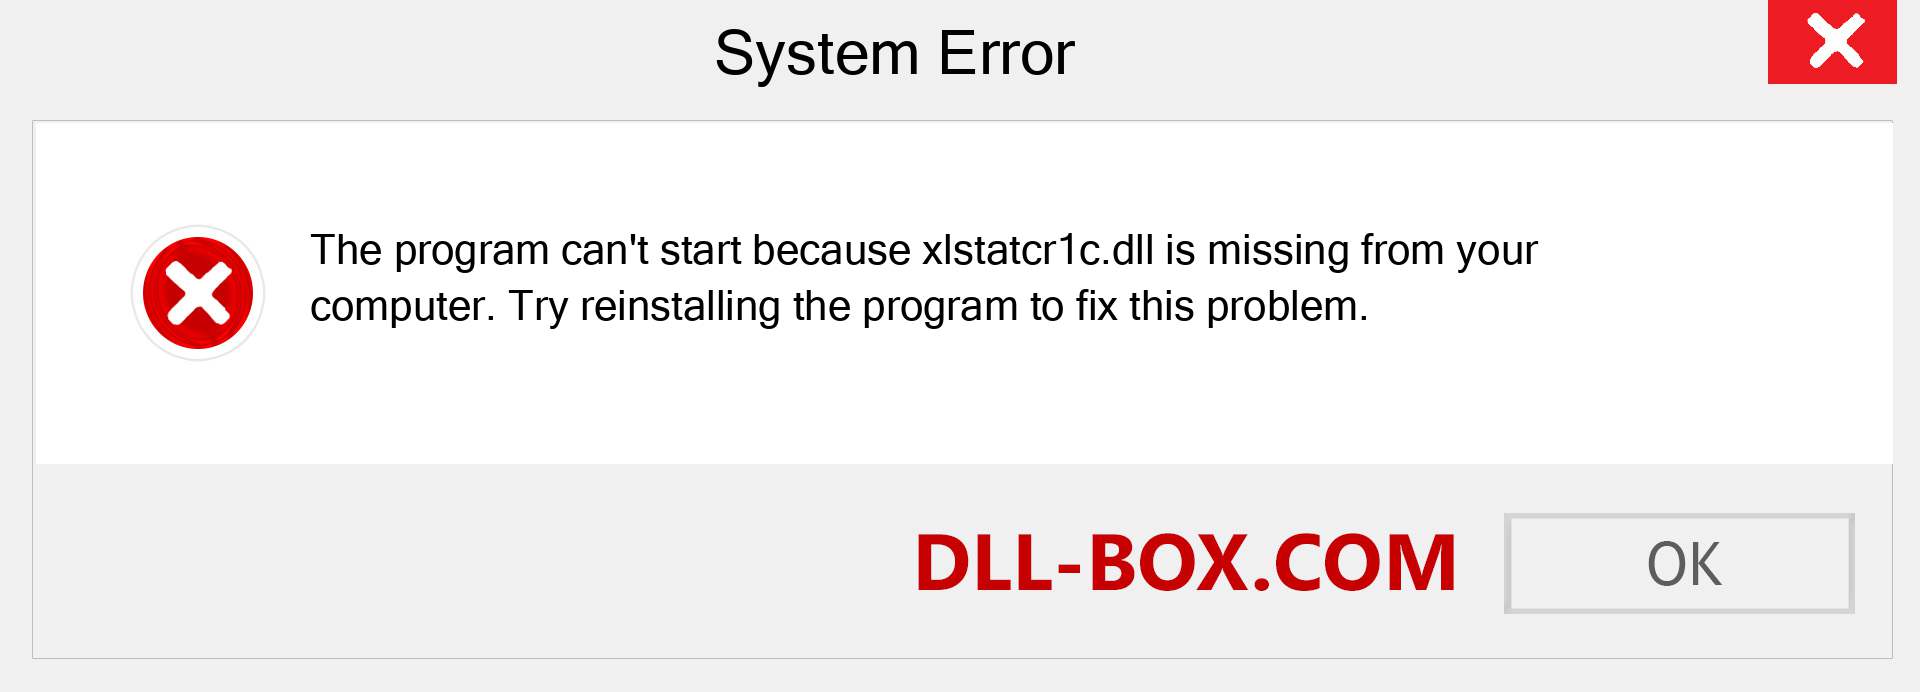  xlstatcr1c.dll file is missing?. Download for Windows 7, 8, 10 - Fix  xlstatcr1c dll Missing Error on Windows, photos, images